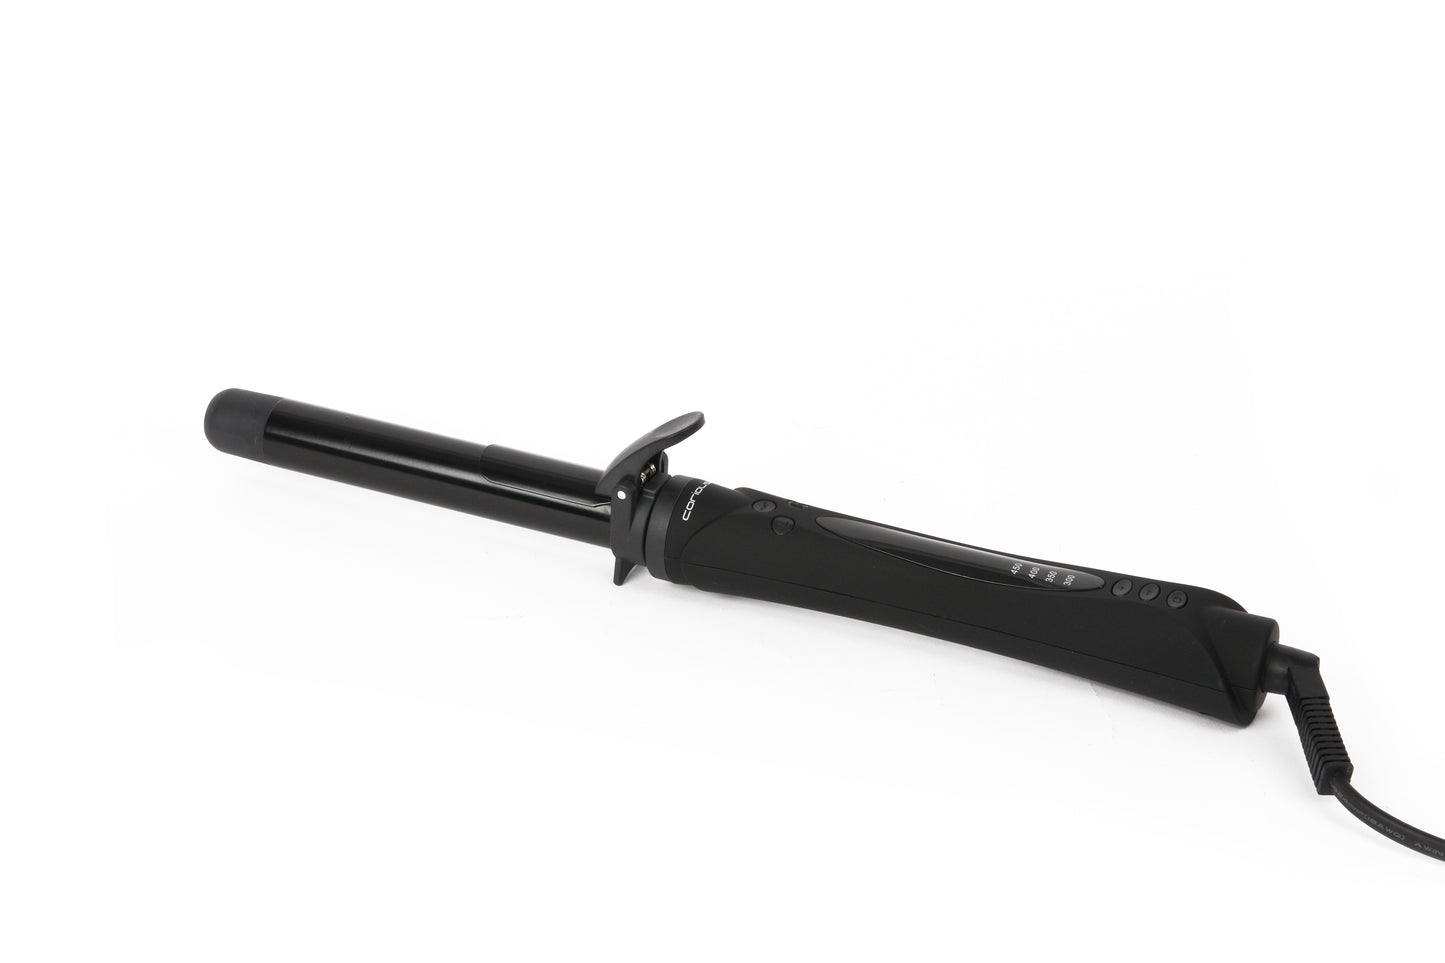 Corioliss Curling Iron. Motorized Dual-Spin Rotating Barrel. Dual-Voltage.